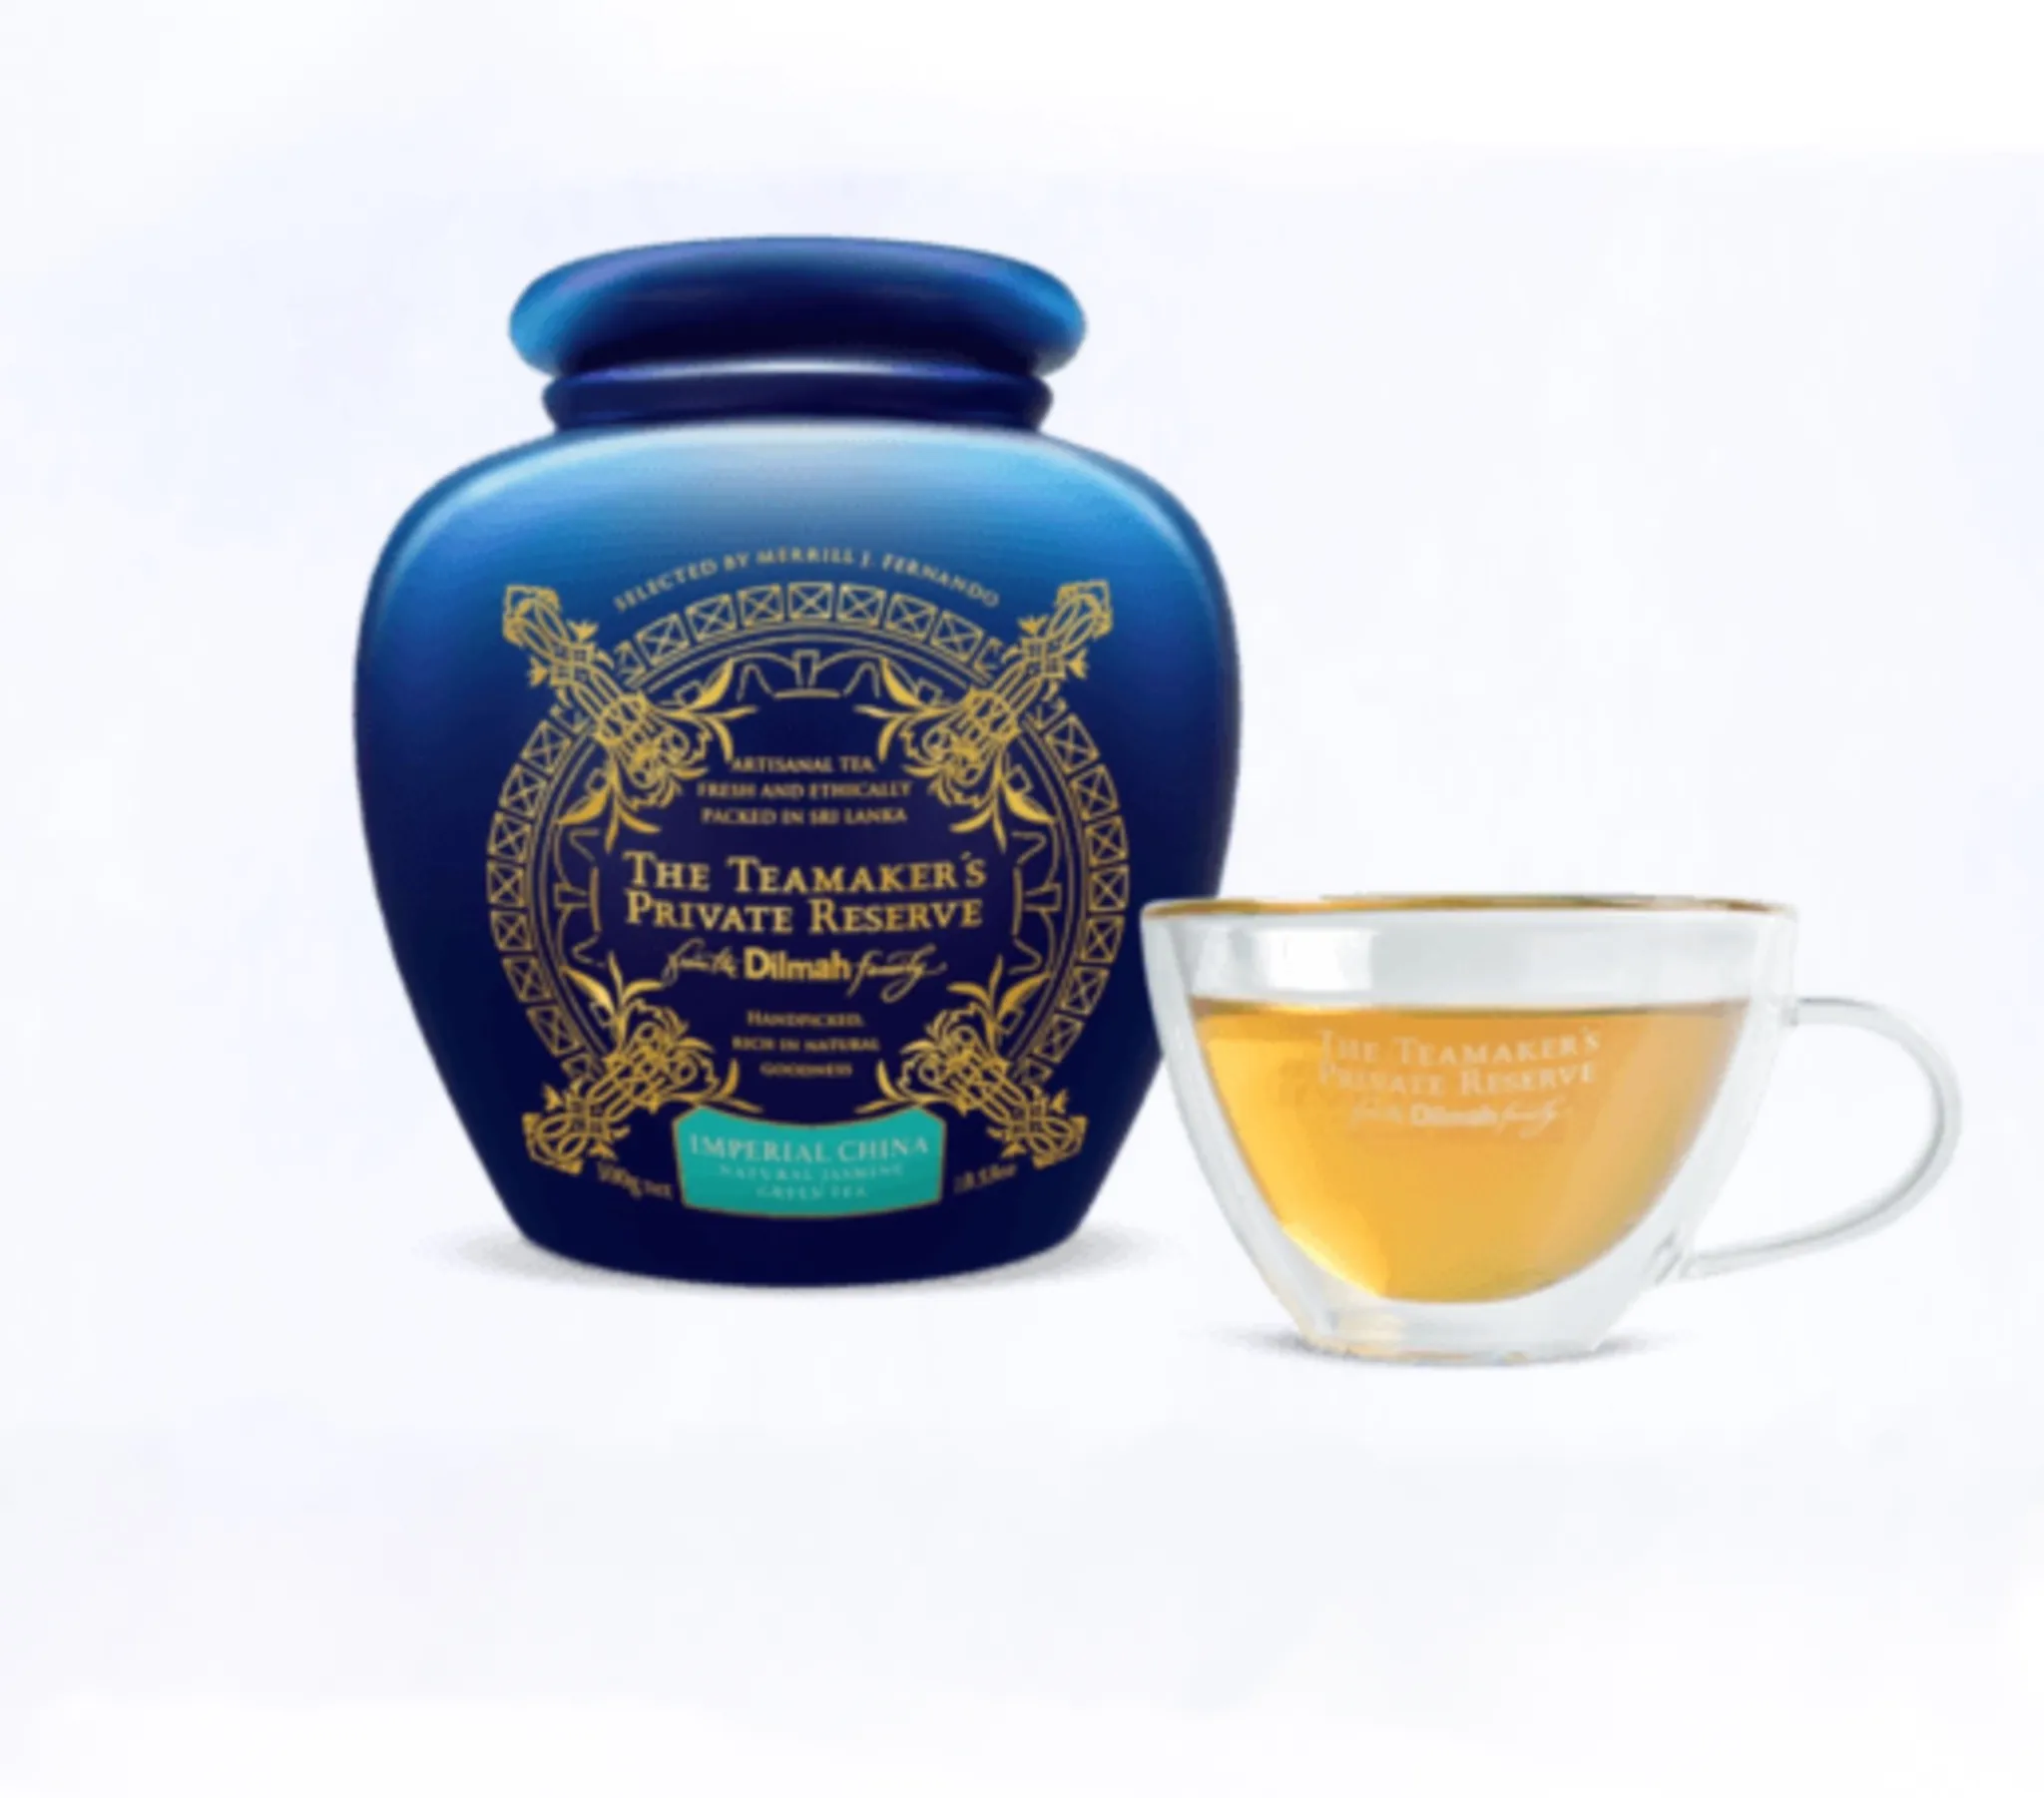 jar of Imperial China natural jasmine green tea tea-maker's private reserve with a cup of it